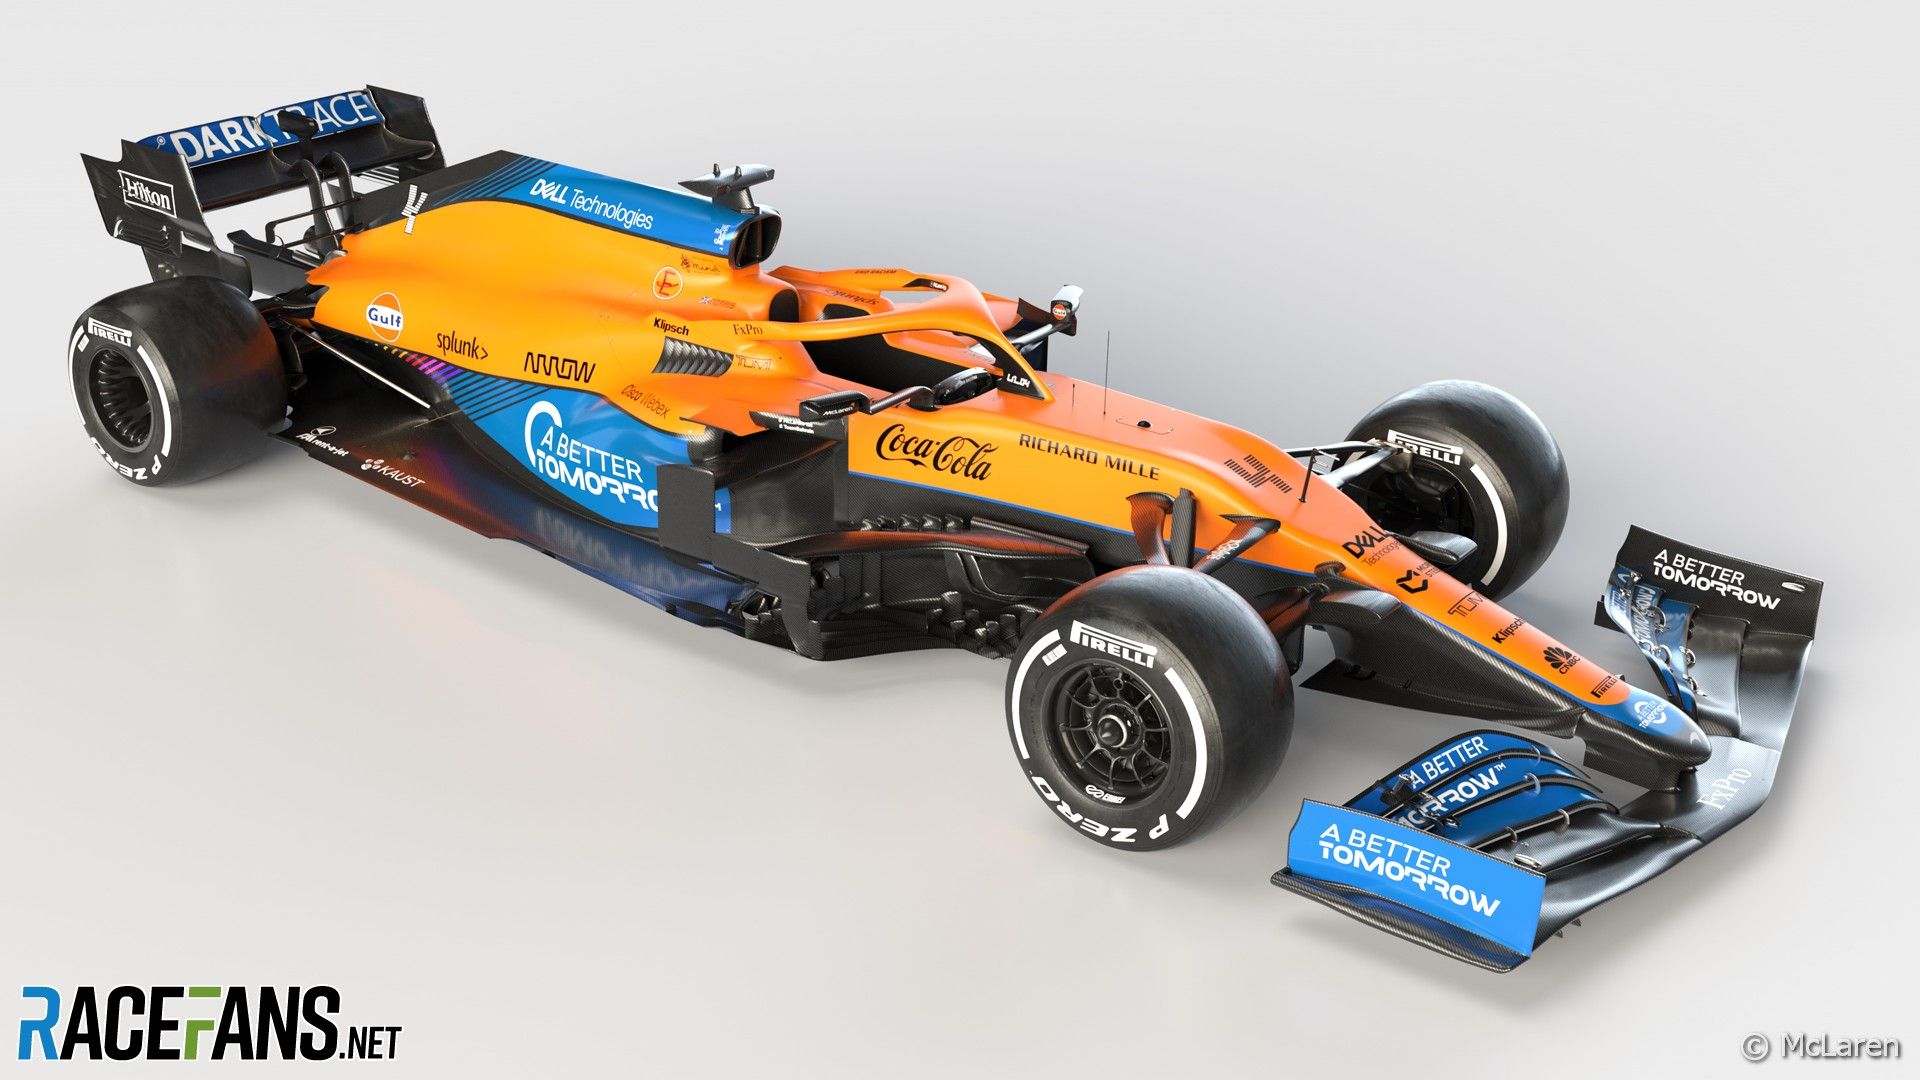 New McLaren F1 car revealed: First picture of MCL35M · RaceFans